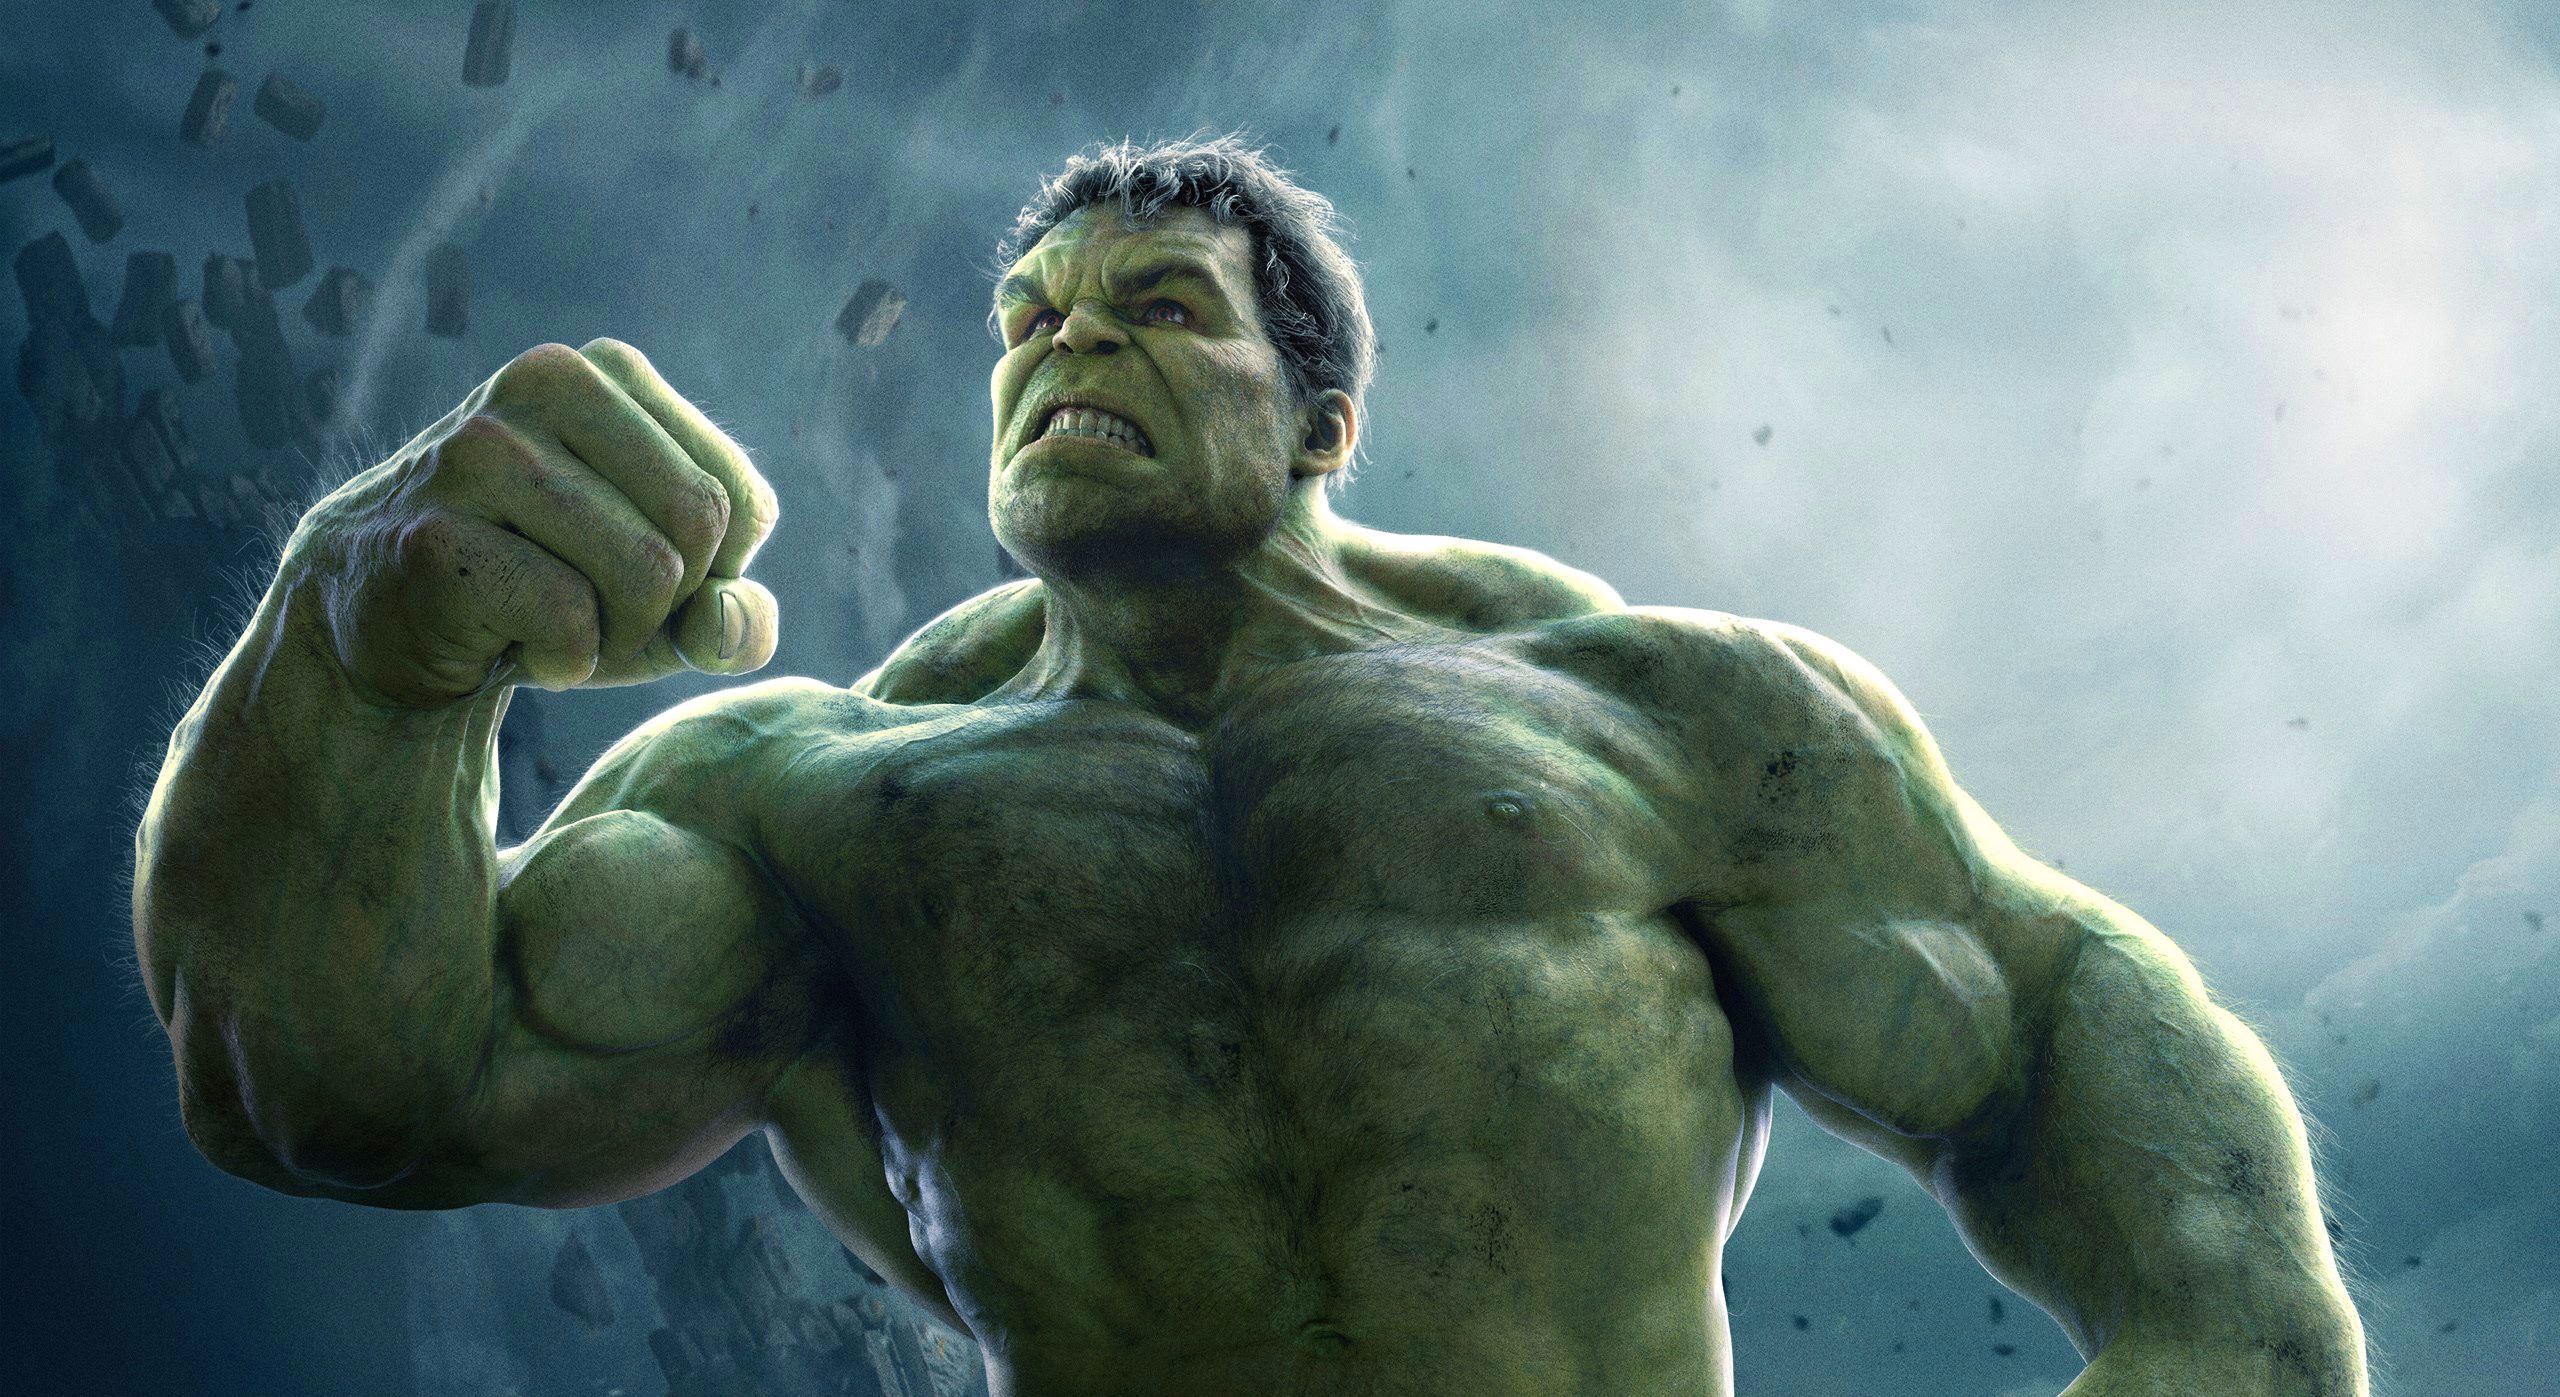 Why There's Never Been A Hulk MCU Movie But She-Hulk Is Happening